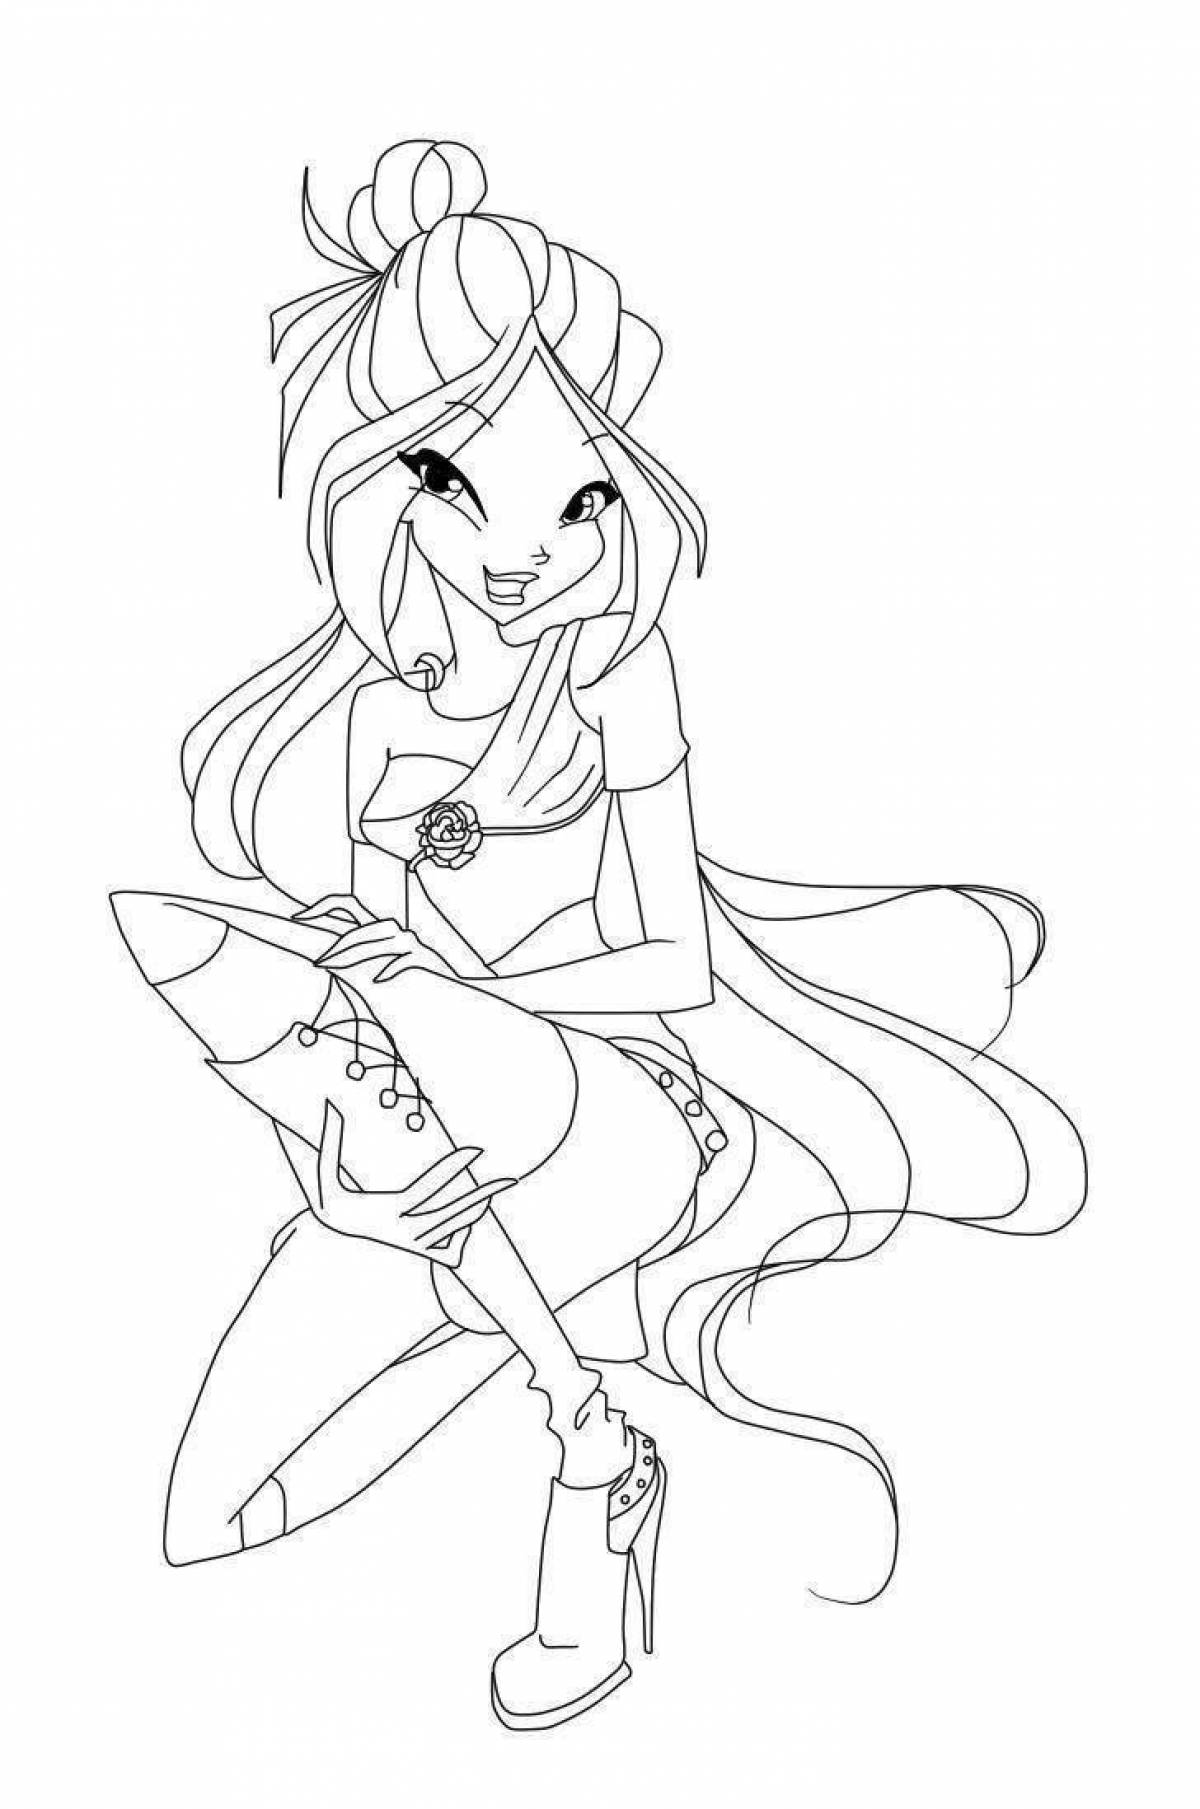 Charming flora winx coloring book